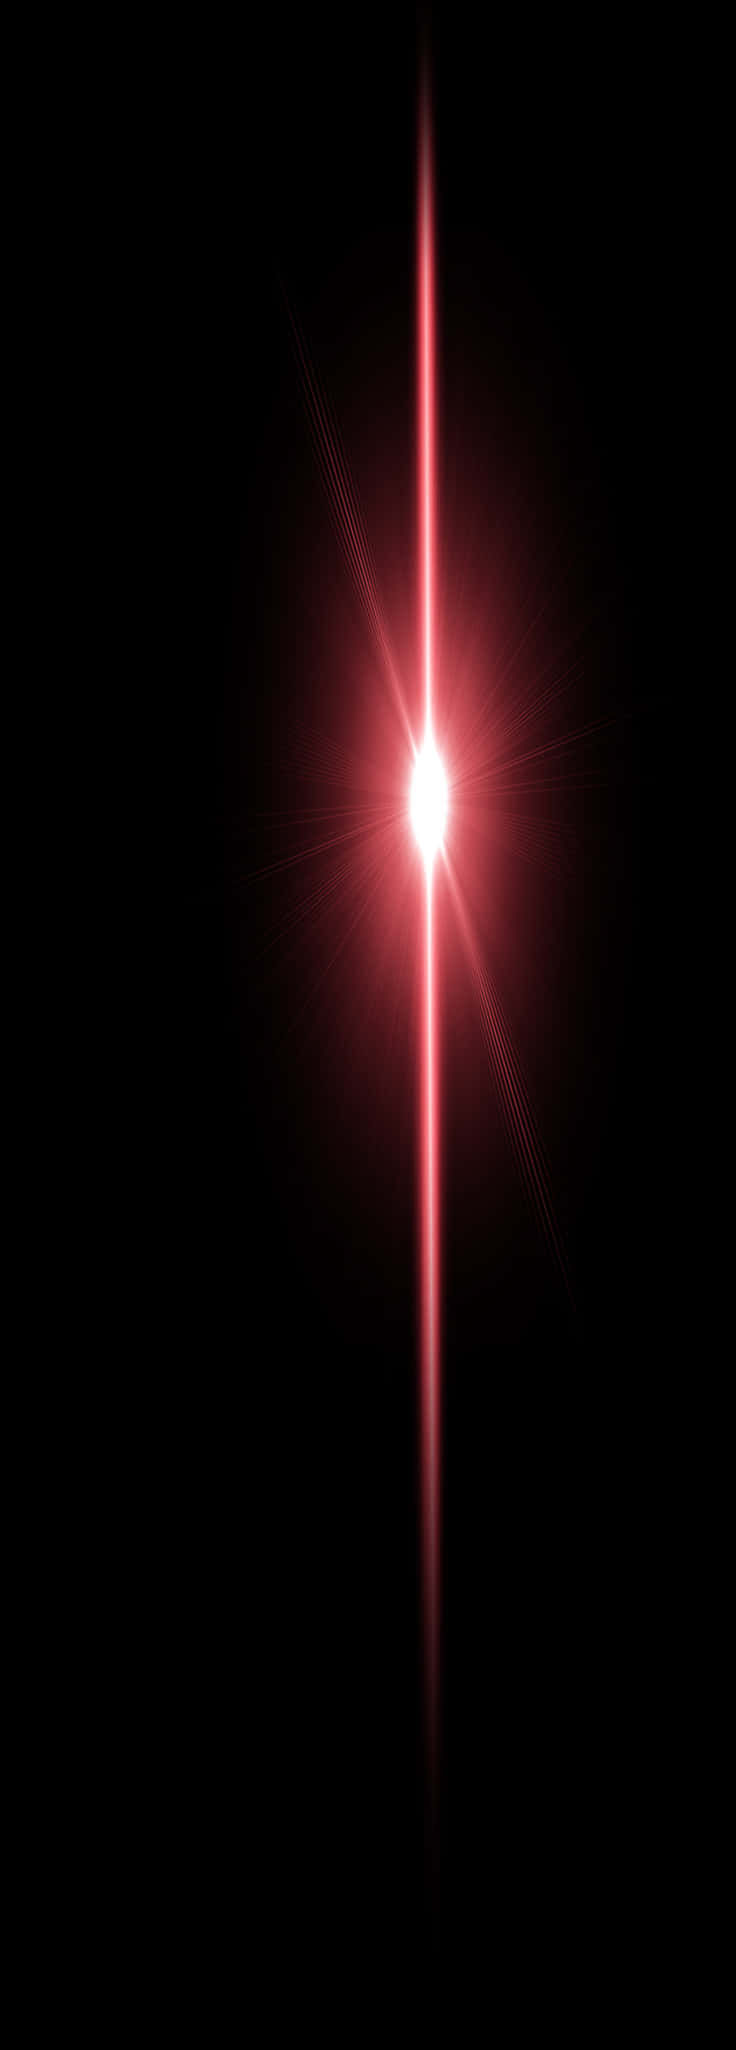 A Red Light Beam In The Dark